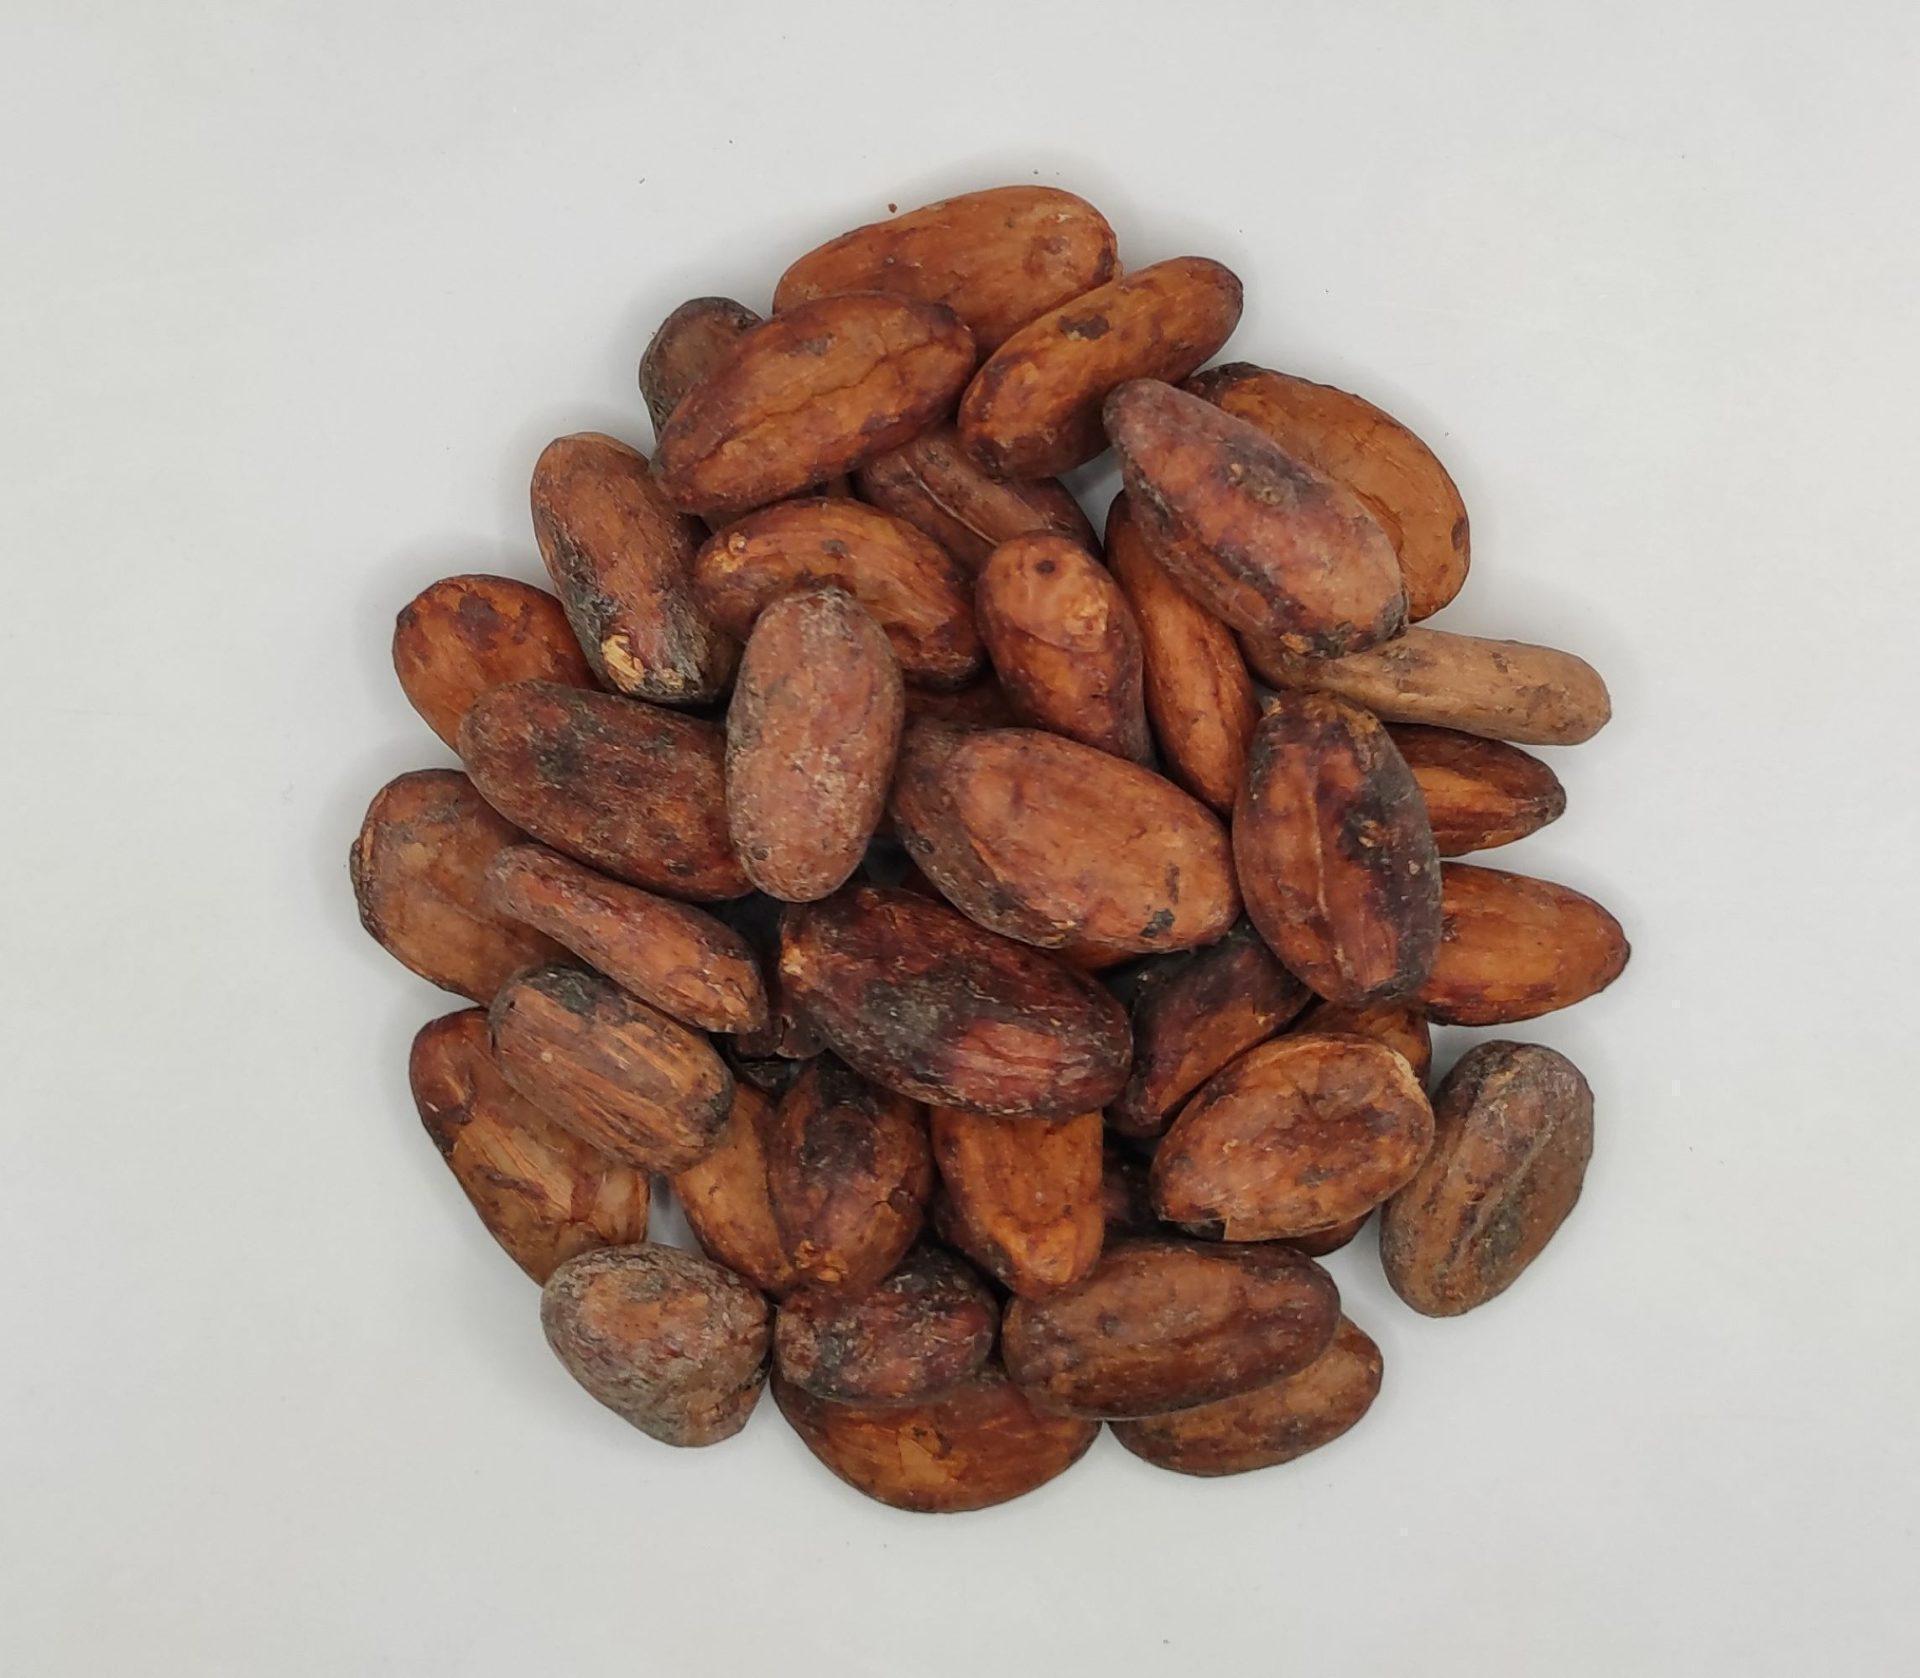 Picture Your cacao beans On Top. Read This And Make It So